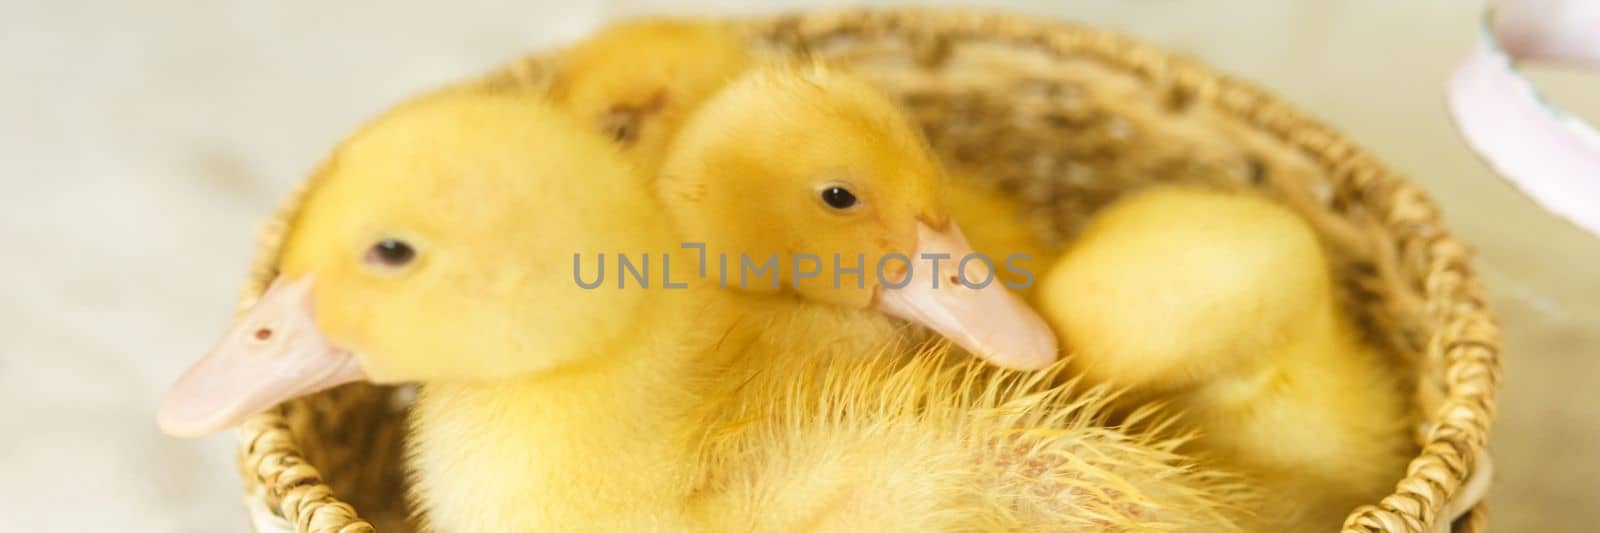 Live yellow ducks in a wicker basket made of matting close-up. the concept of raising animals on a farm. by Annu1tochka